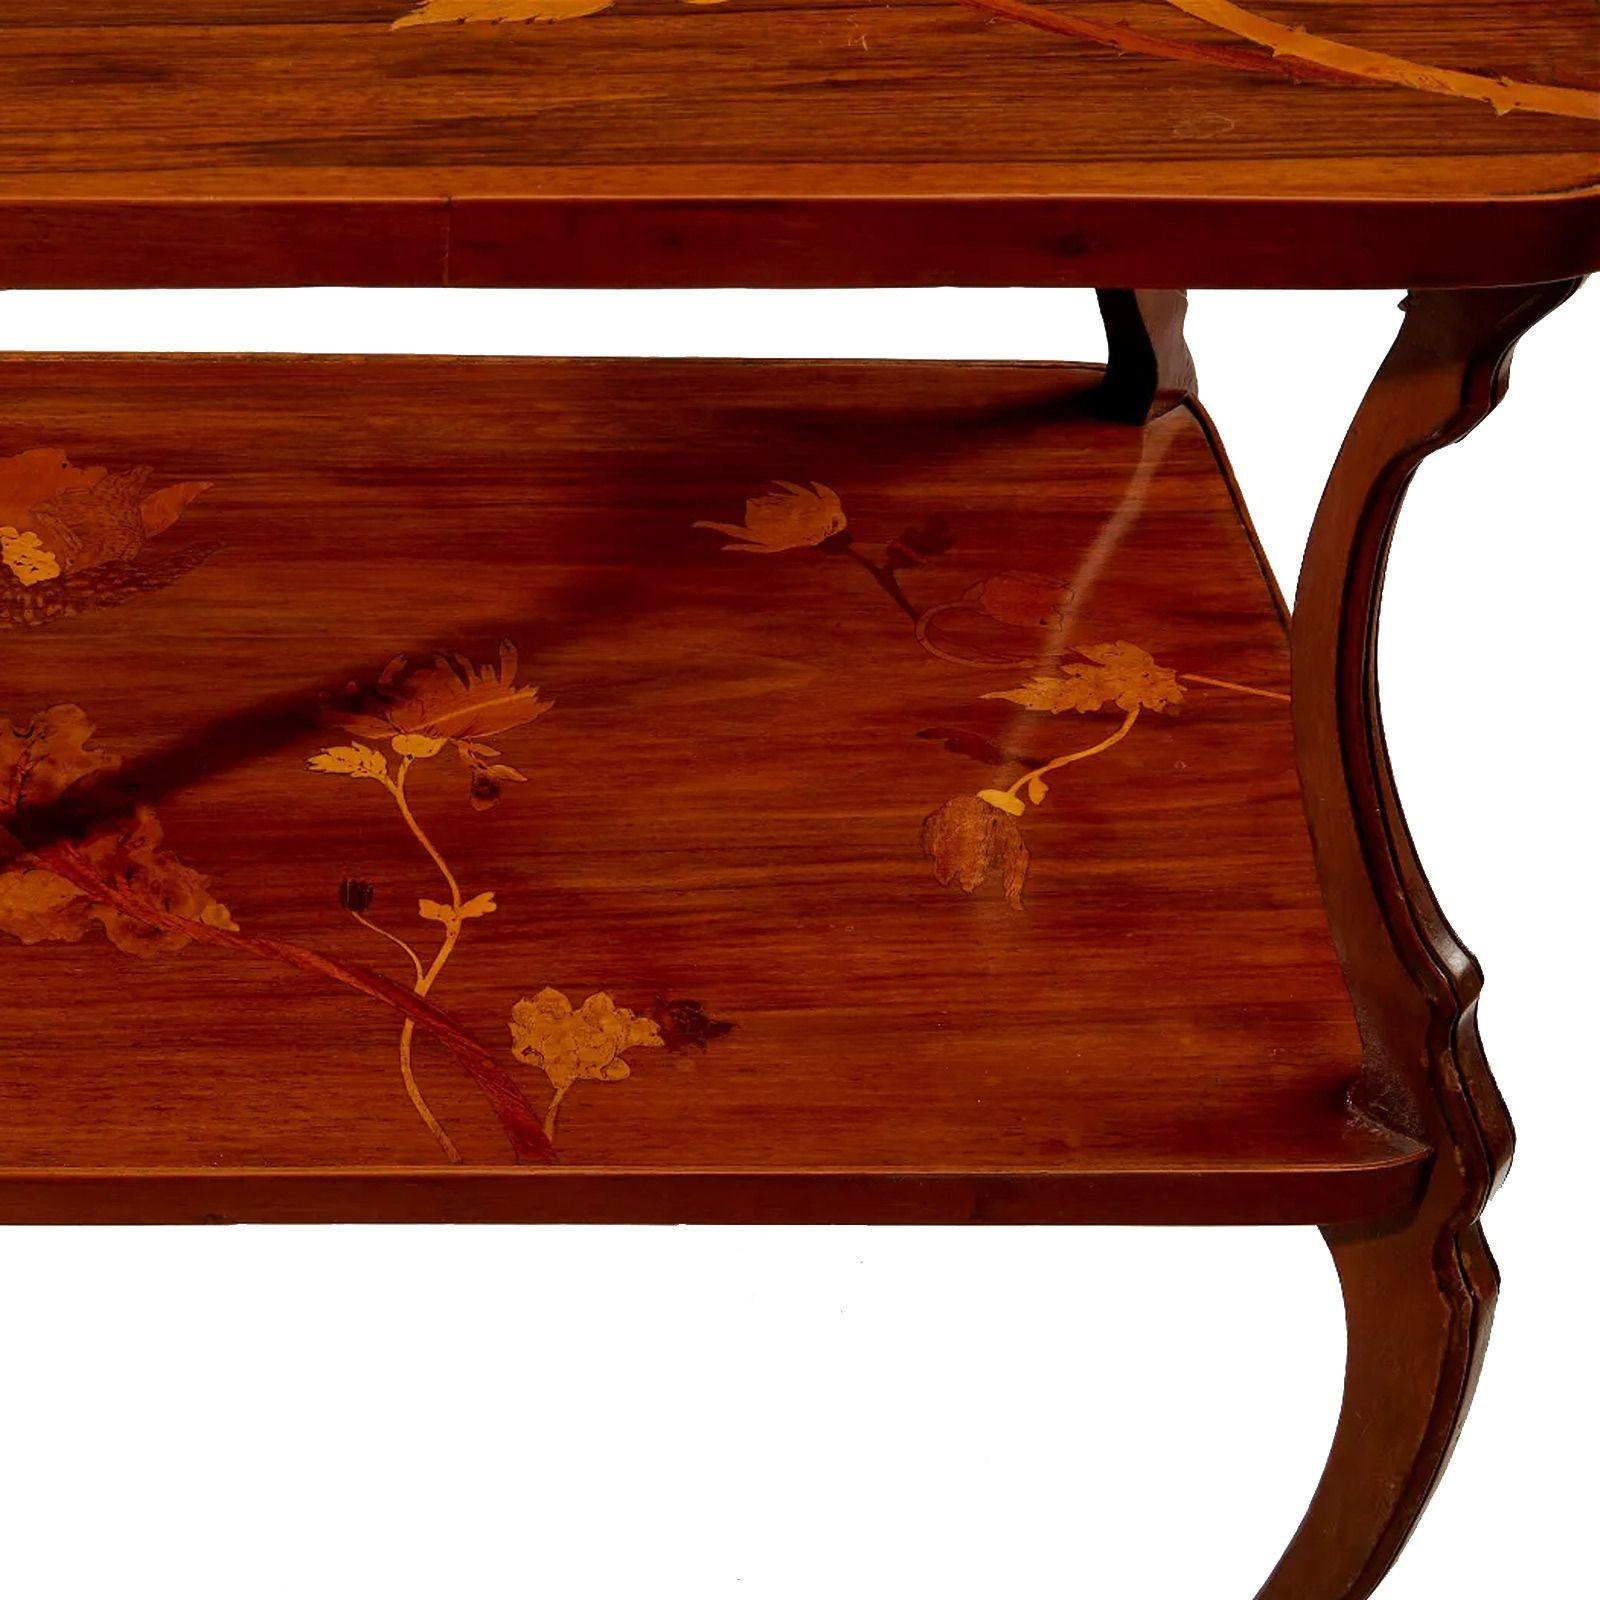 French art nouveau inlaid table, Early 20th century.

With marquetry inlaid raspberry brambles and flowers.
 
Dimensions

33.25i H x 27.5i W x 17.75i D.